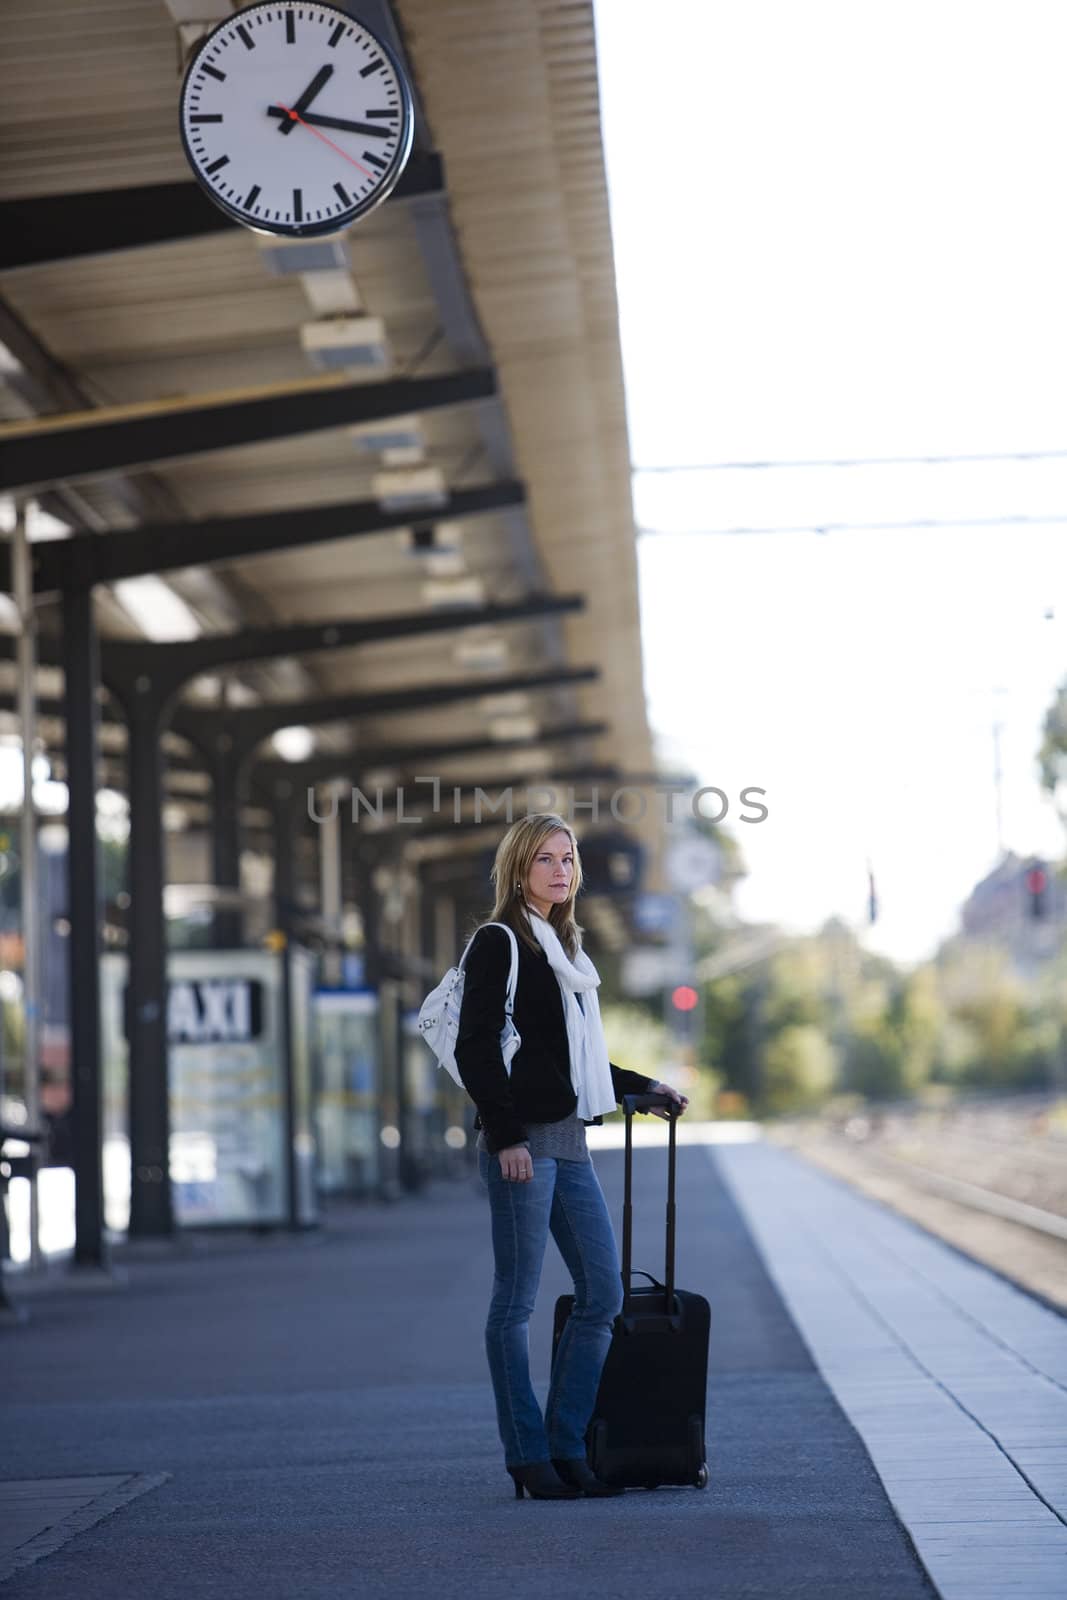 Travelling Woman at the Train Station